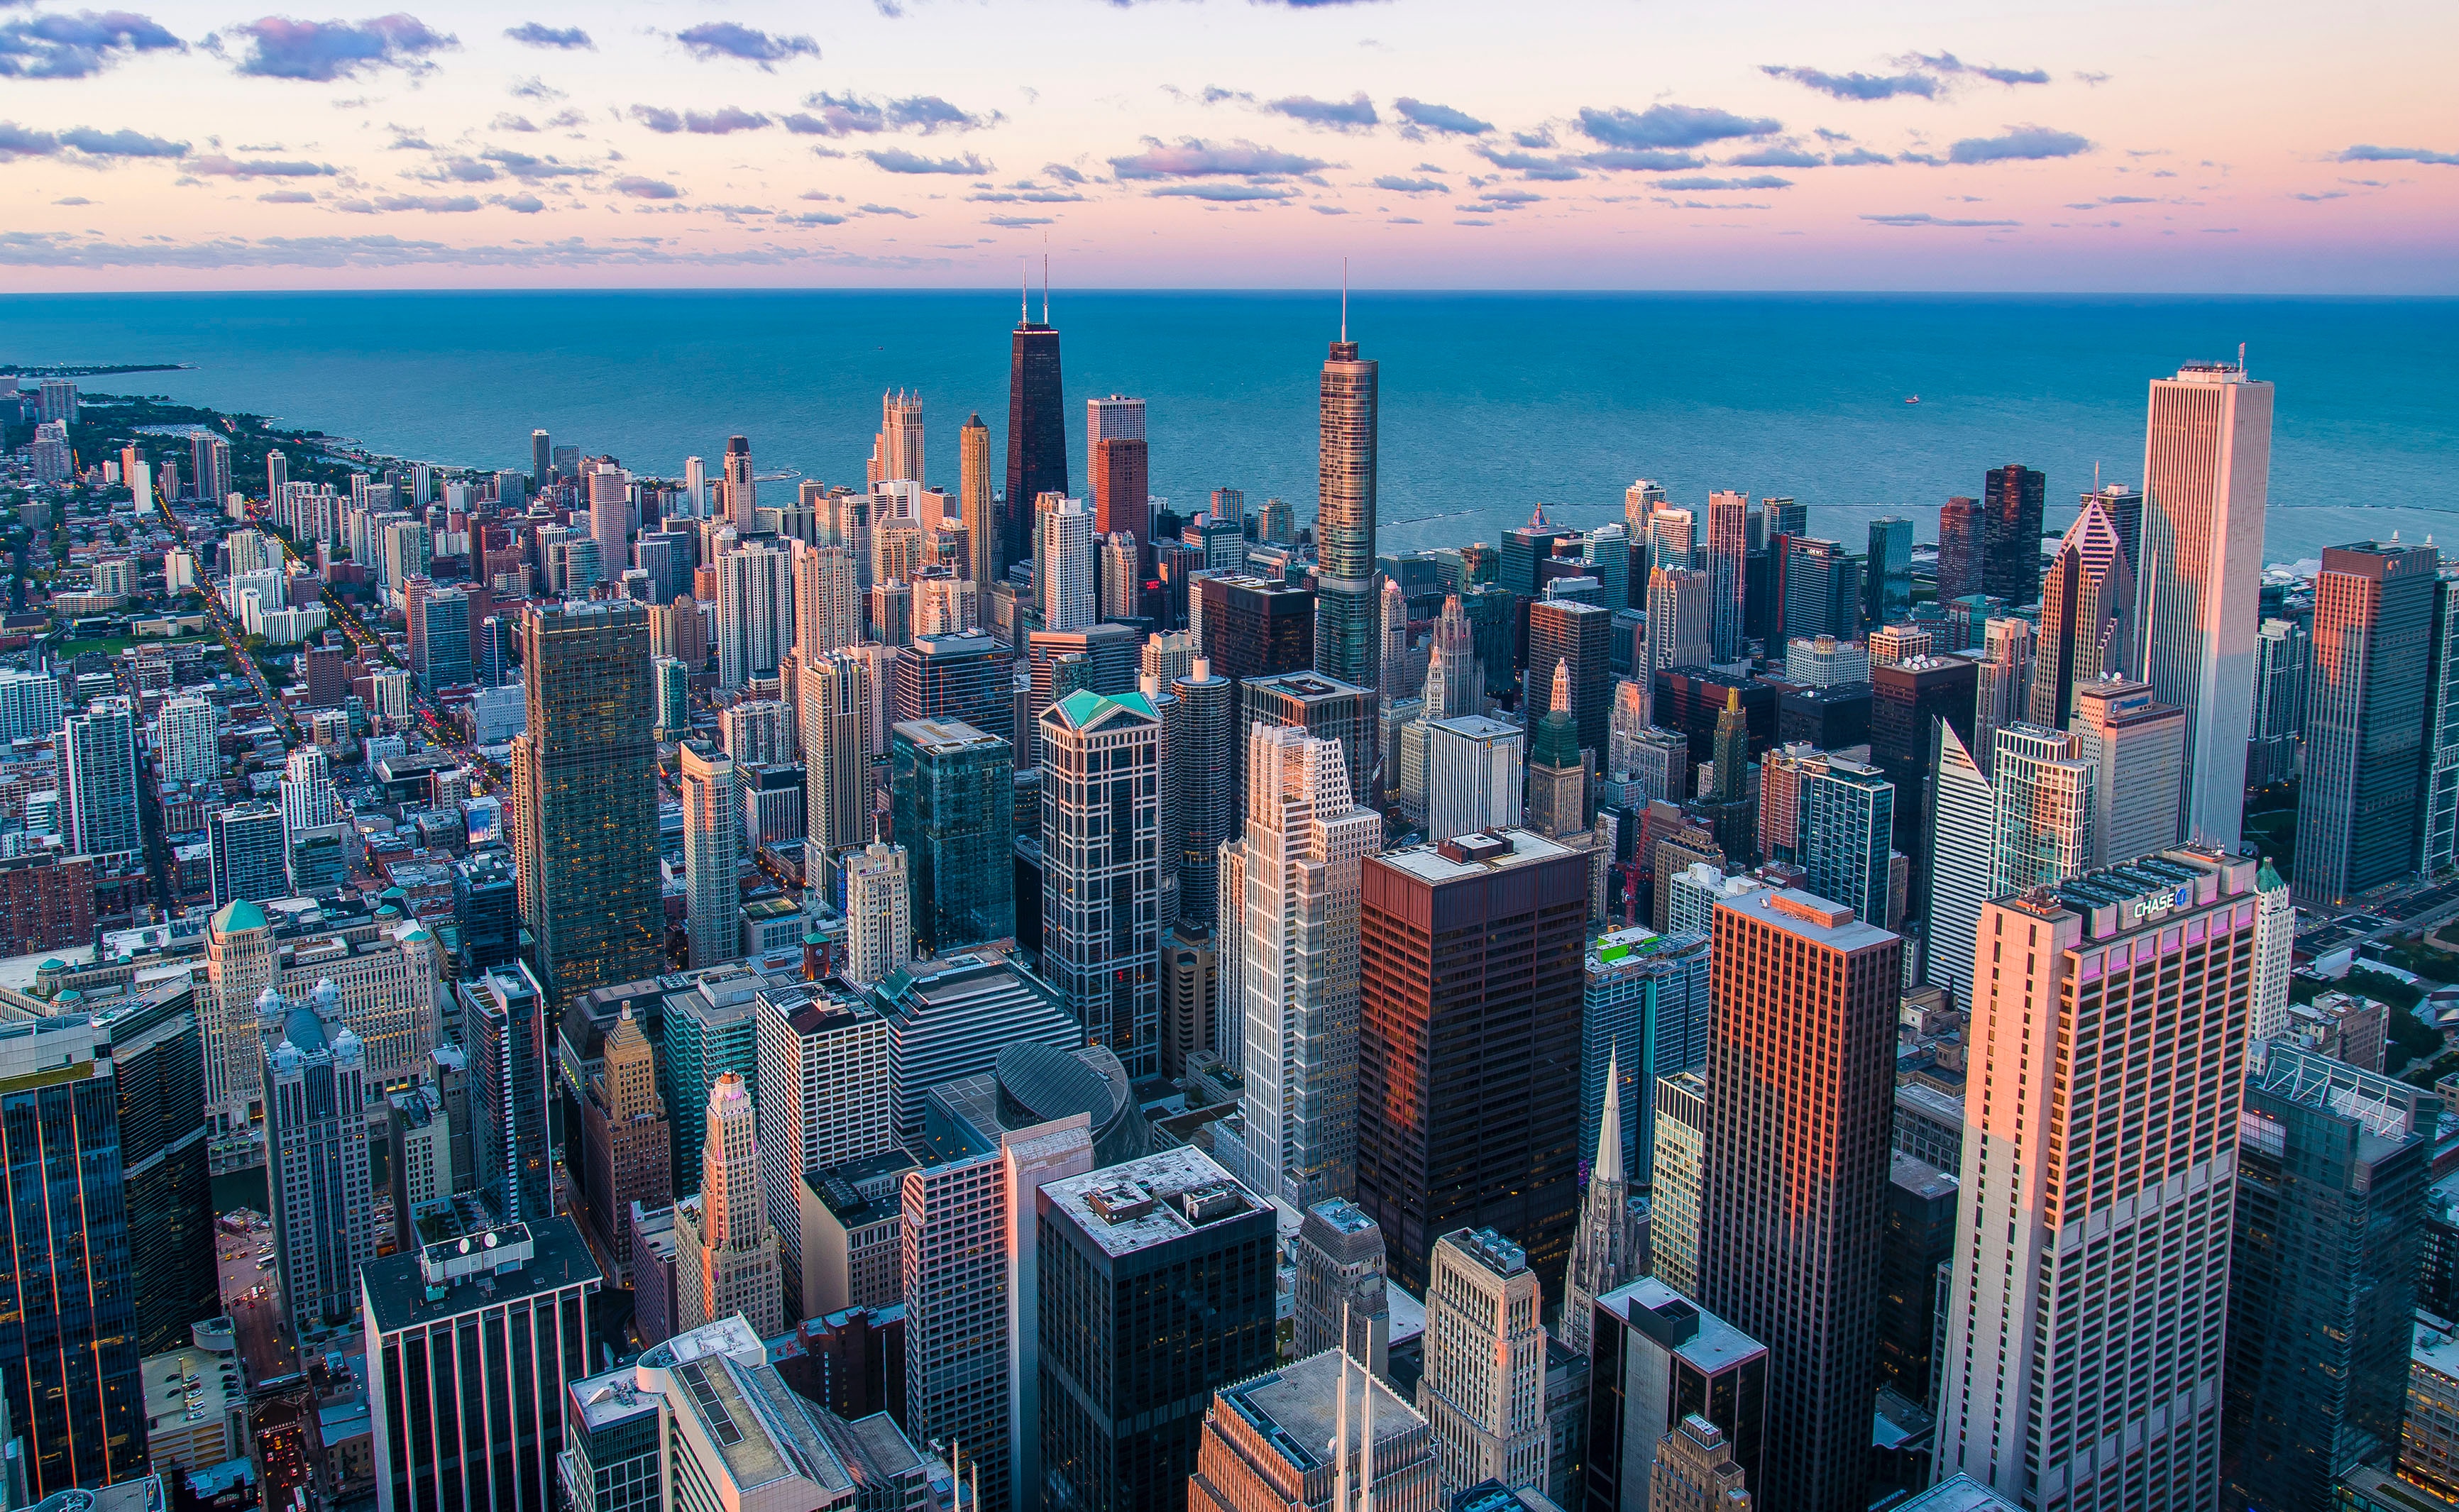 Aerial view of Downtown Chicago with a view of Lake Michigan